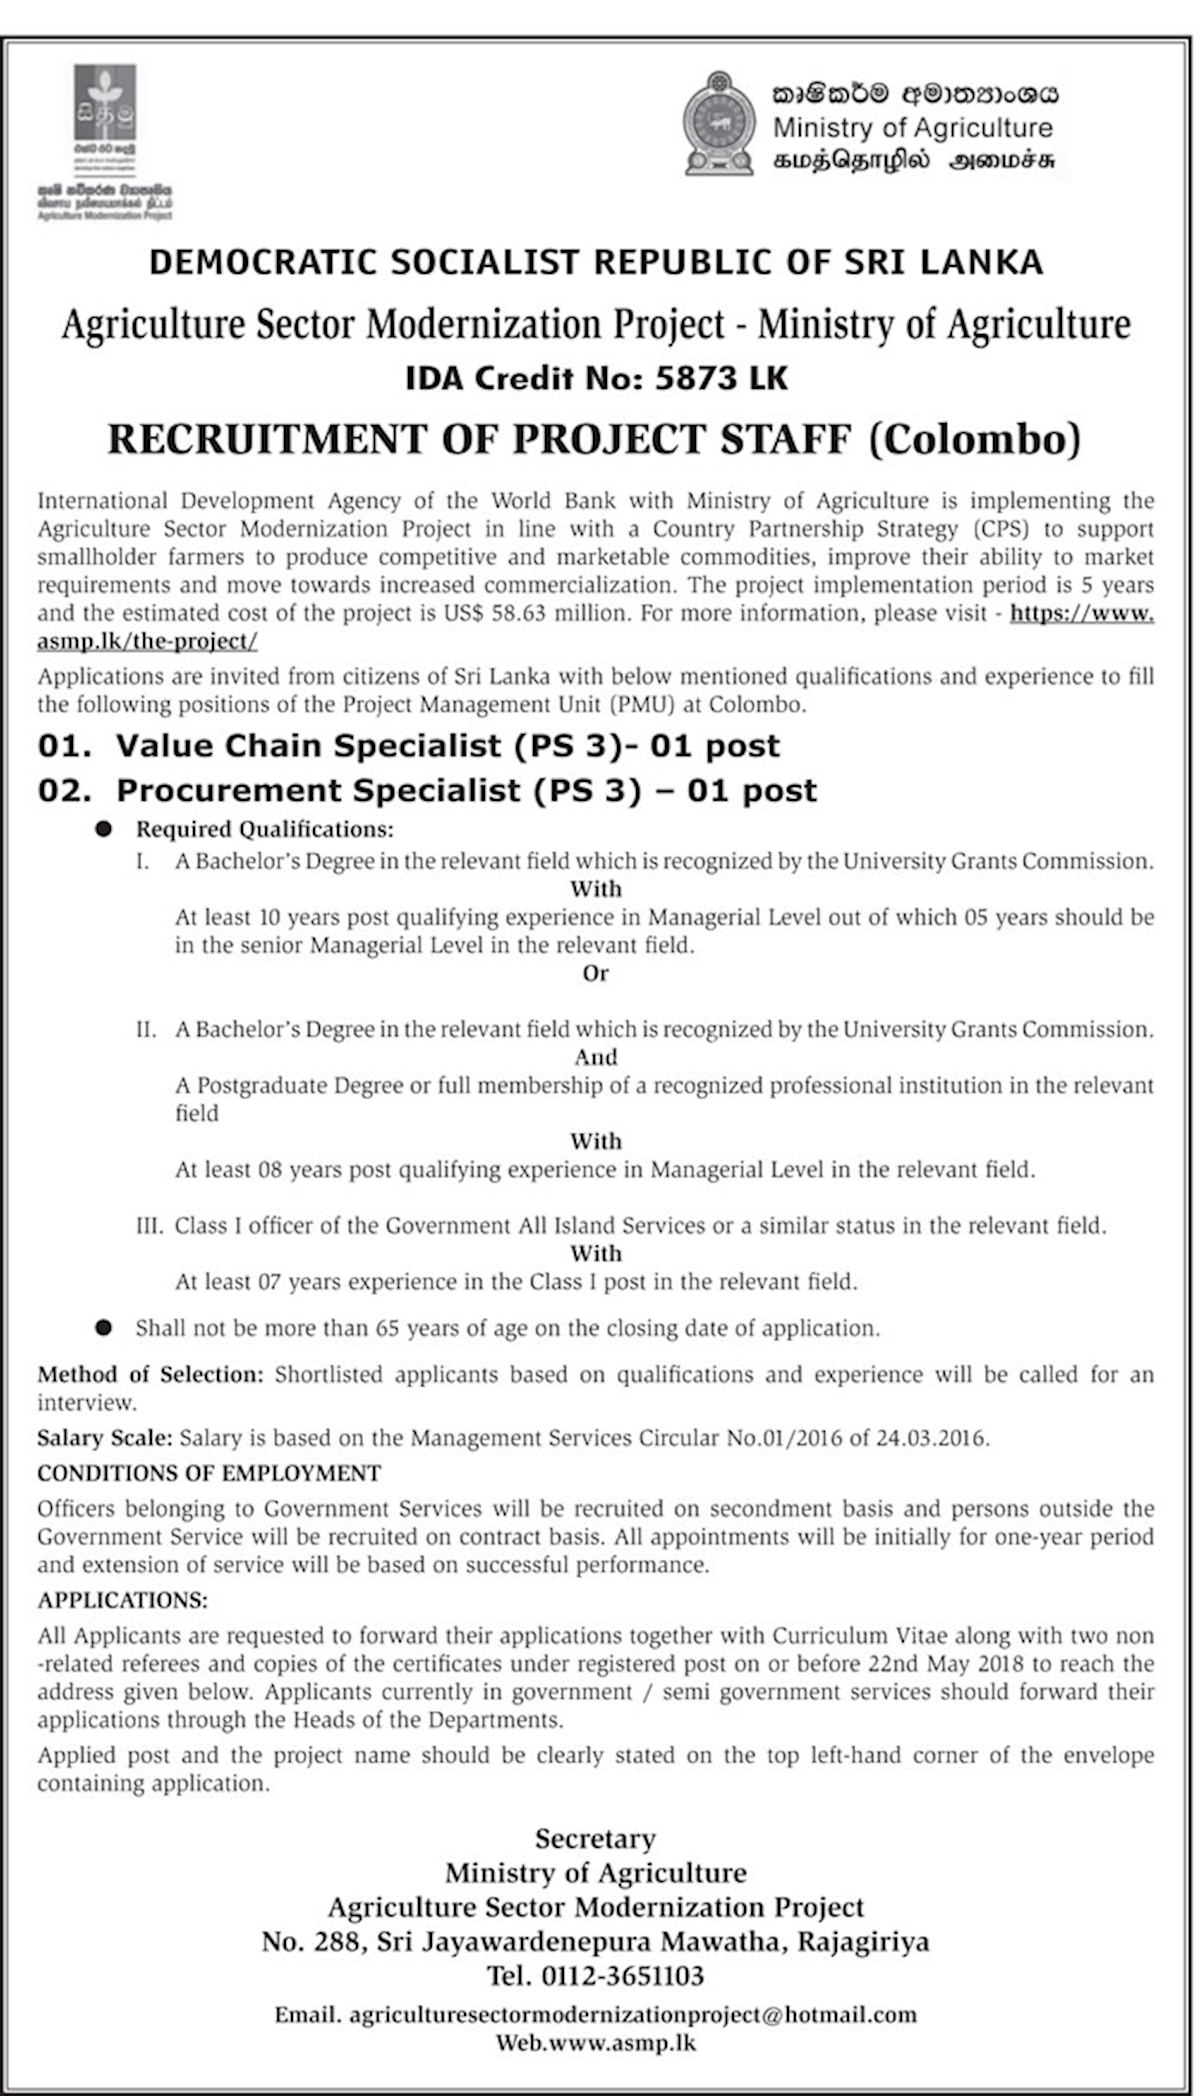 Value Chain Specialist / Procurement Specialist - Ministry of Agriculture